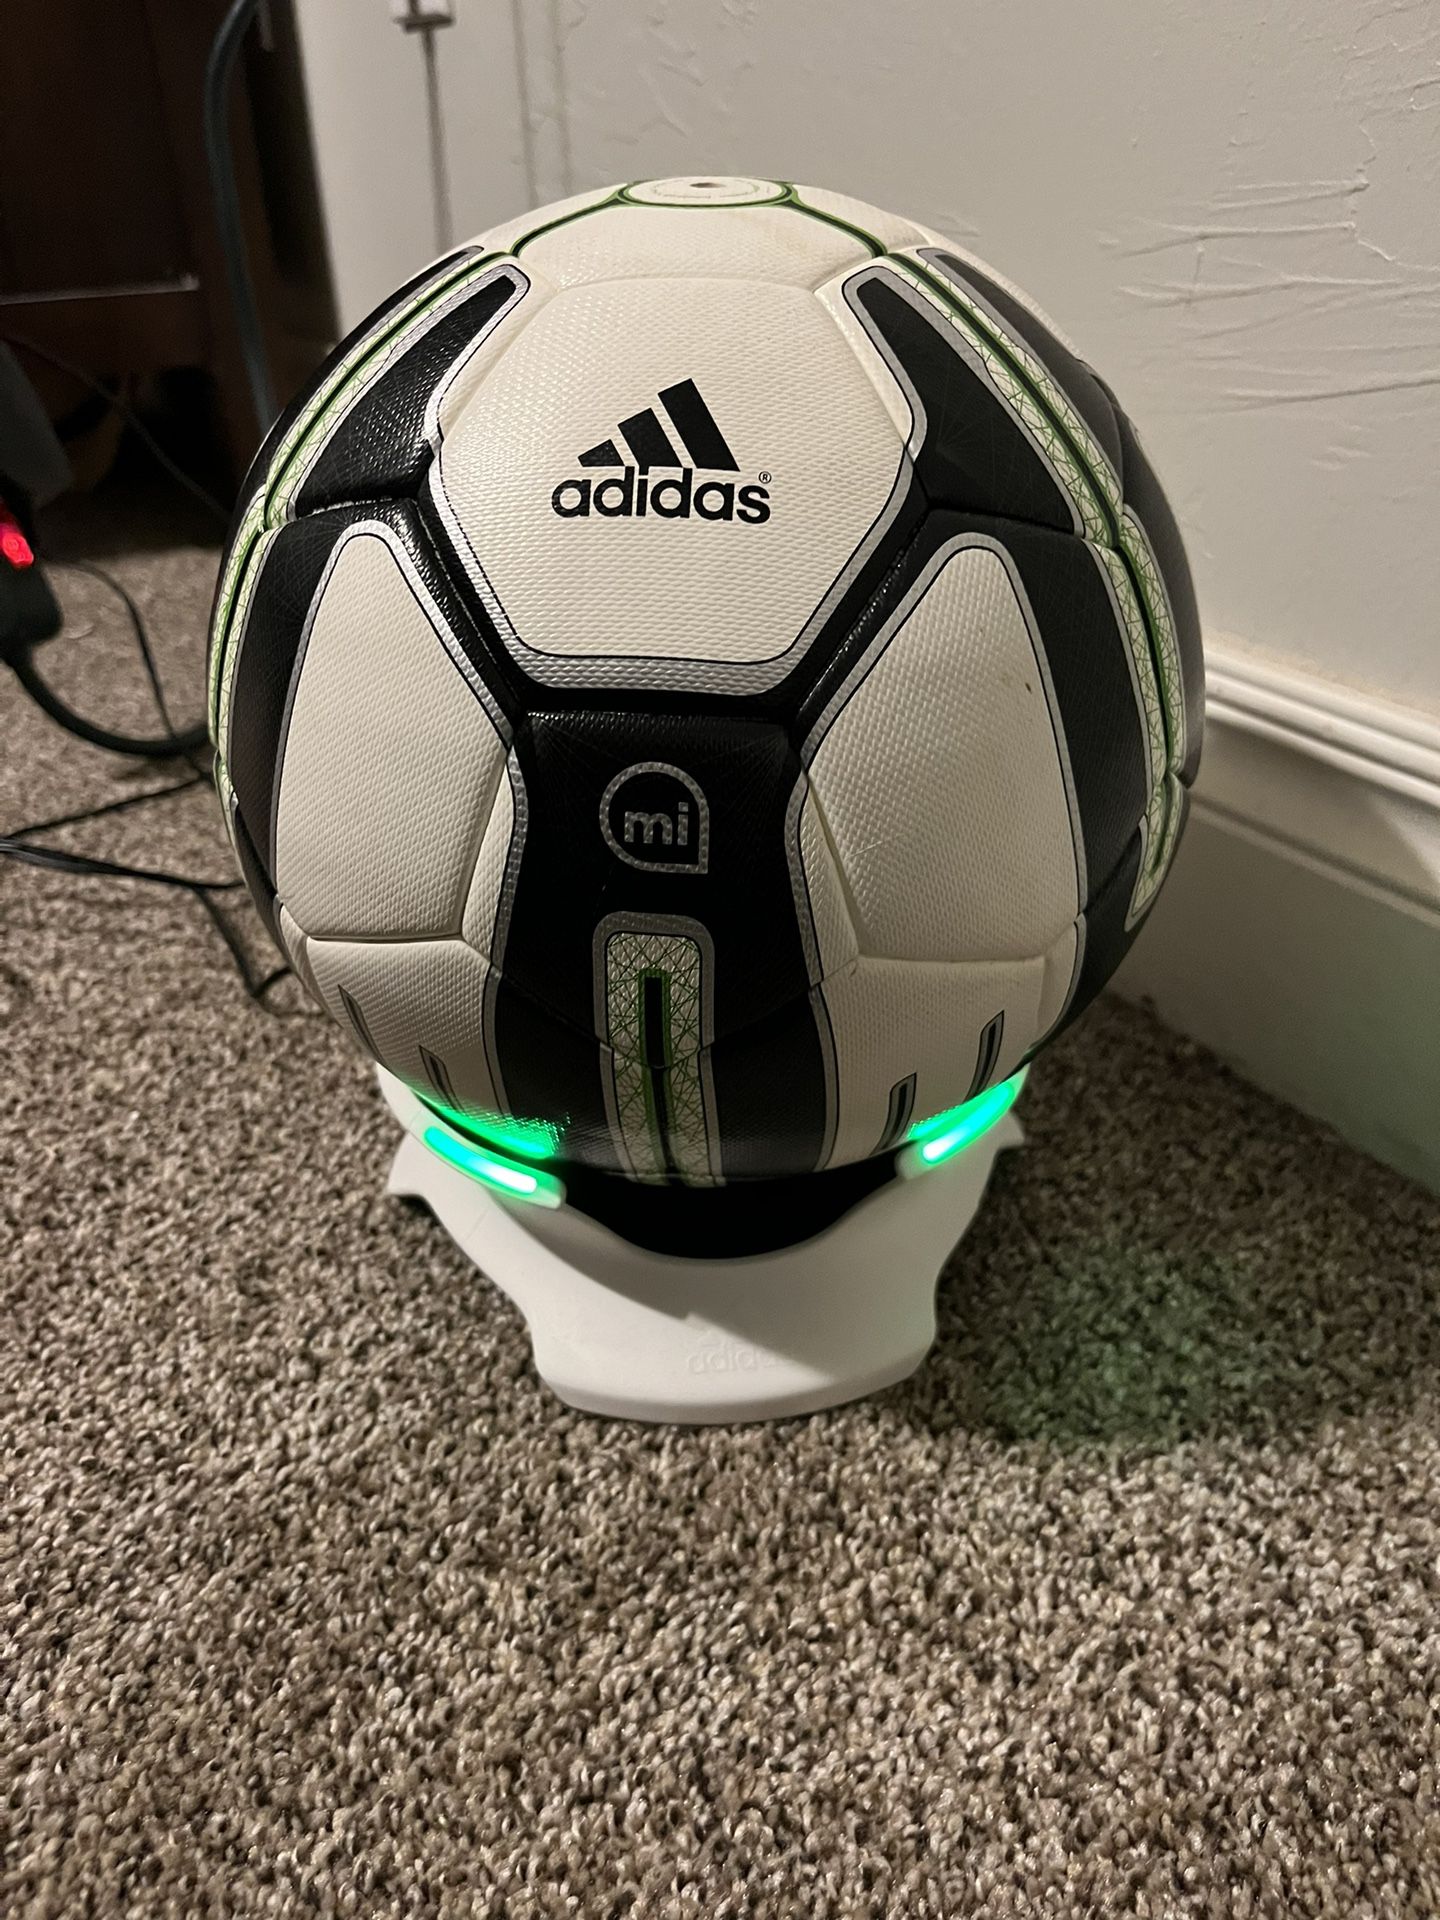 ADIDAS BALL for Sale in Edmond, OK - OfferUp